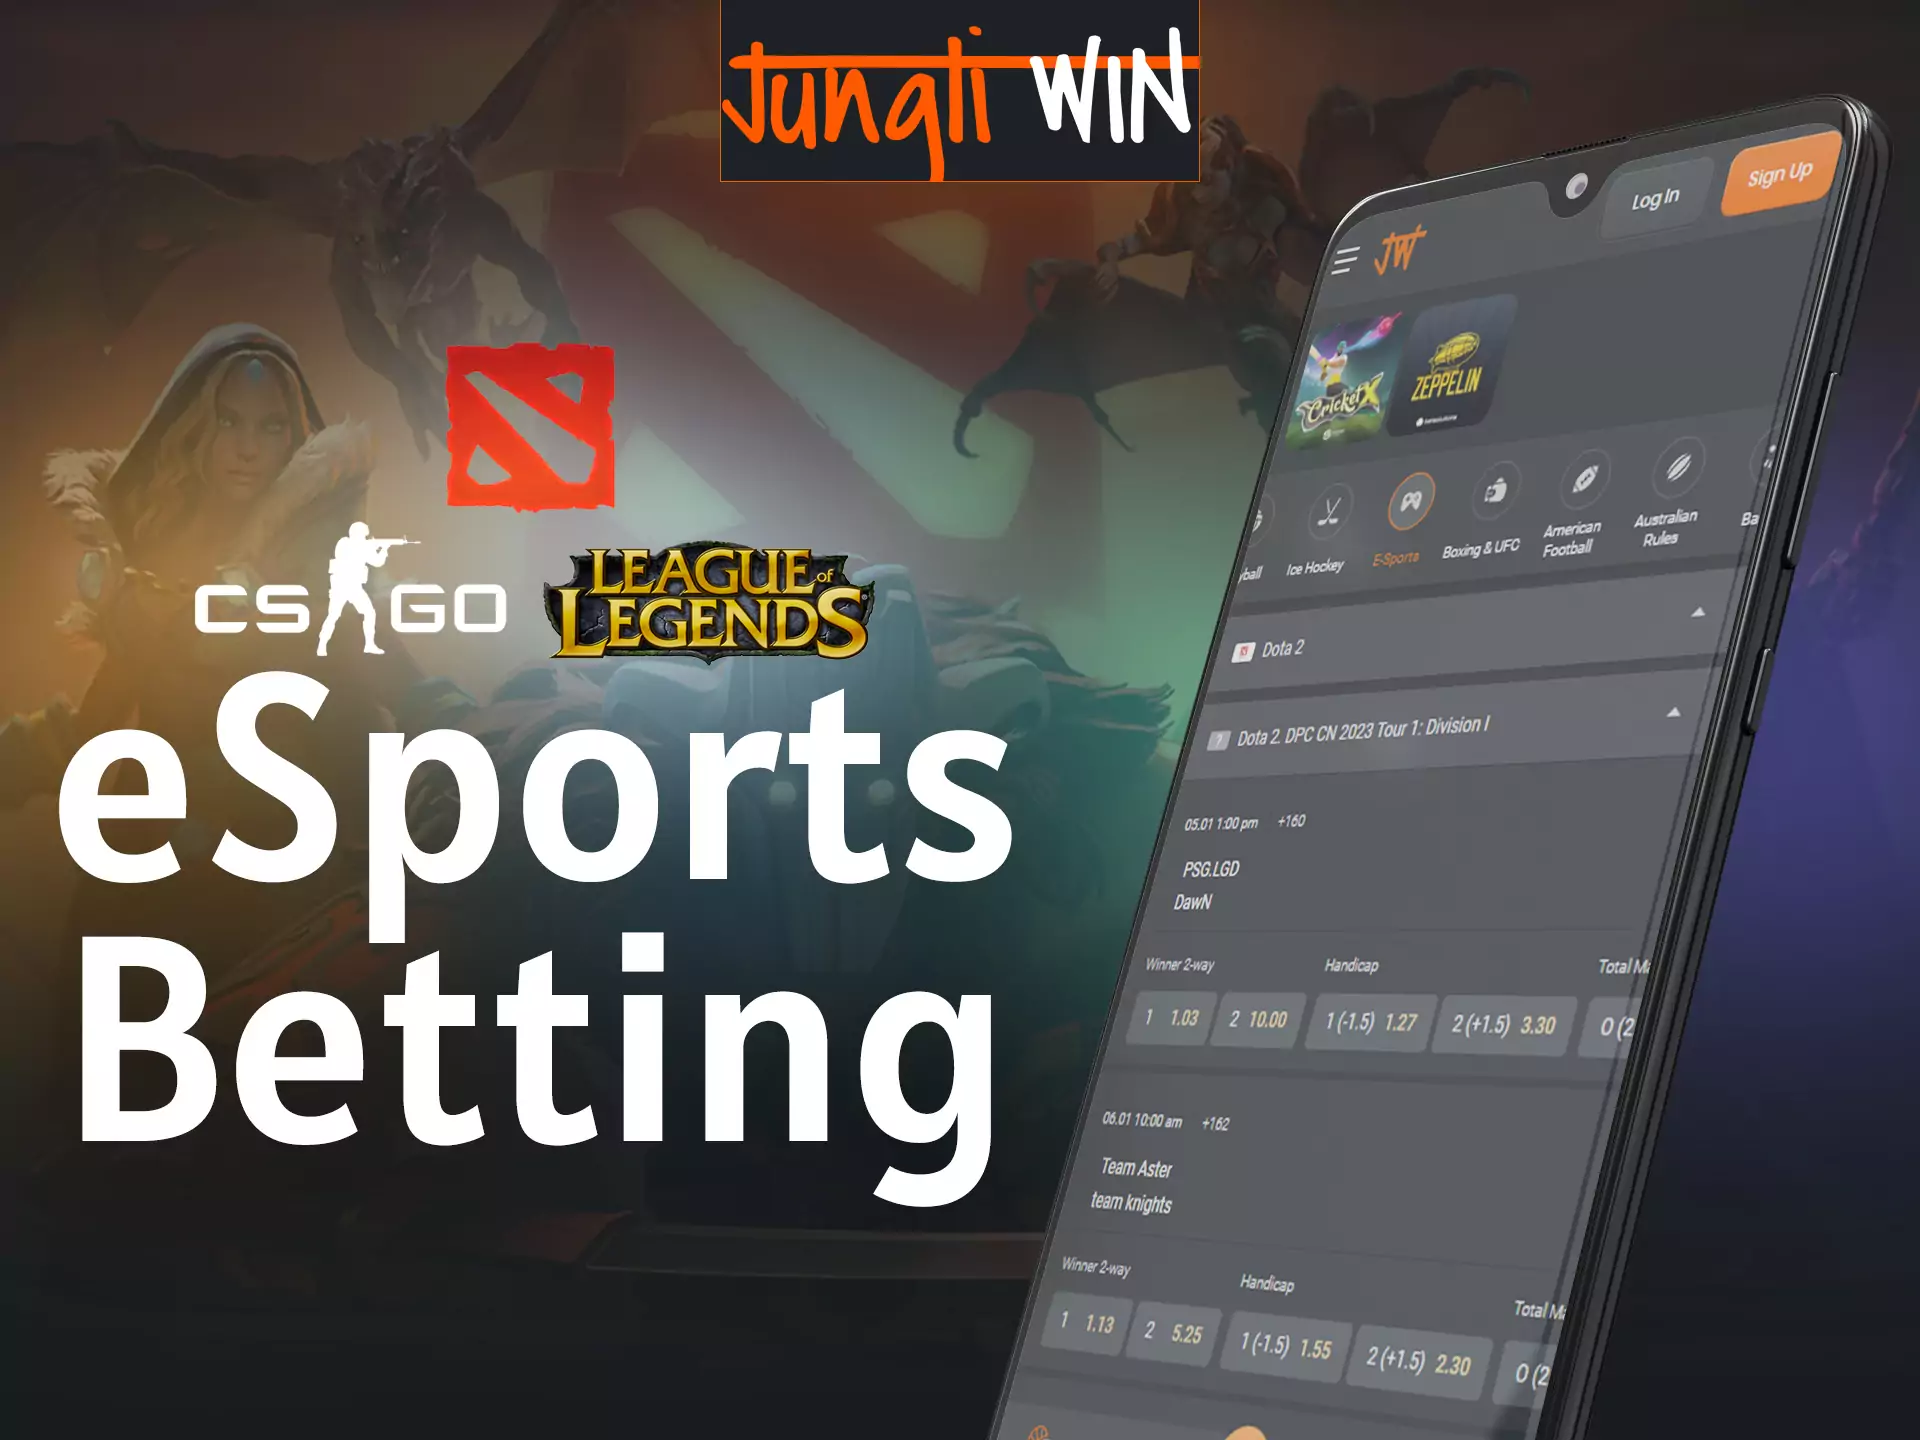 If you are a fan of esports, then Jungliwin offers players to bet on any events of this sport.